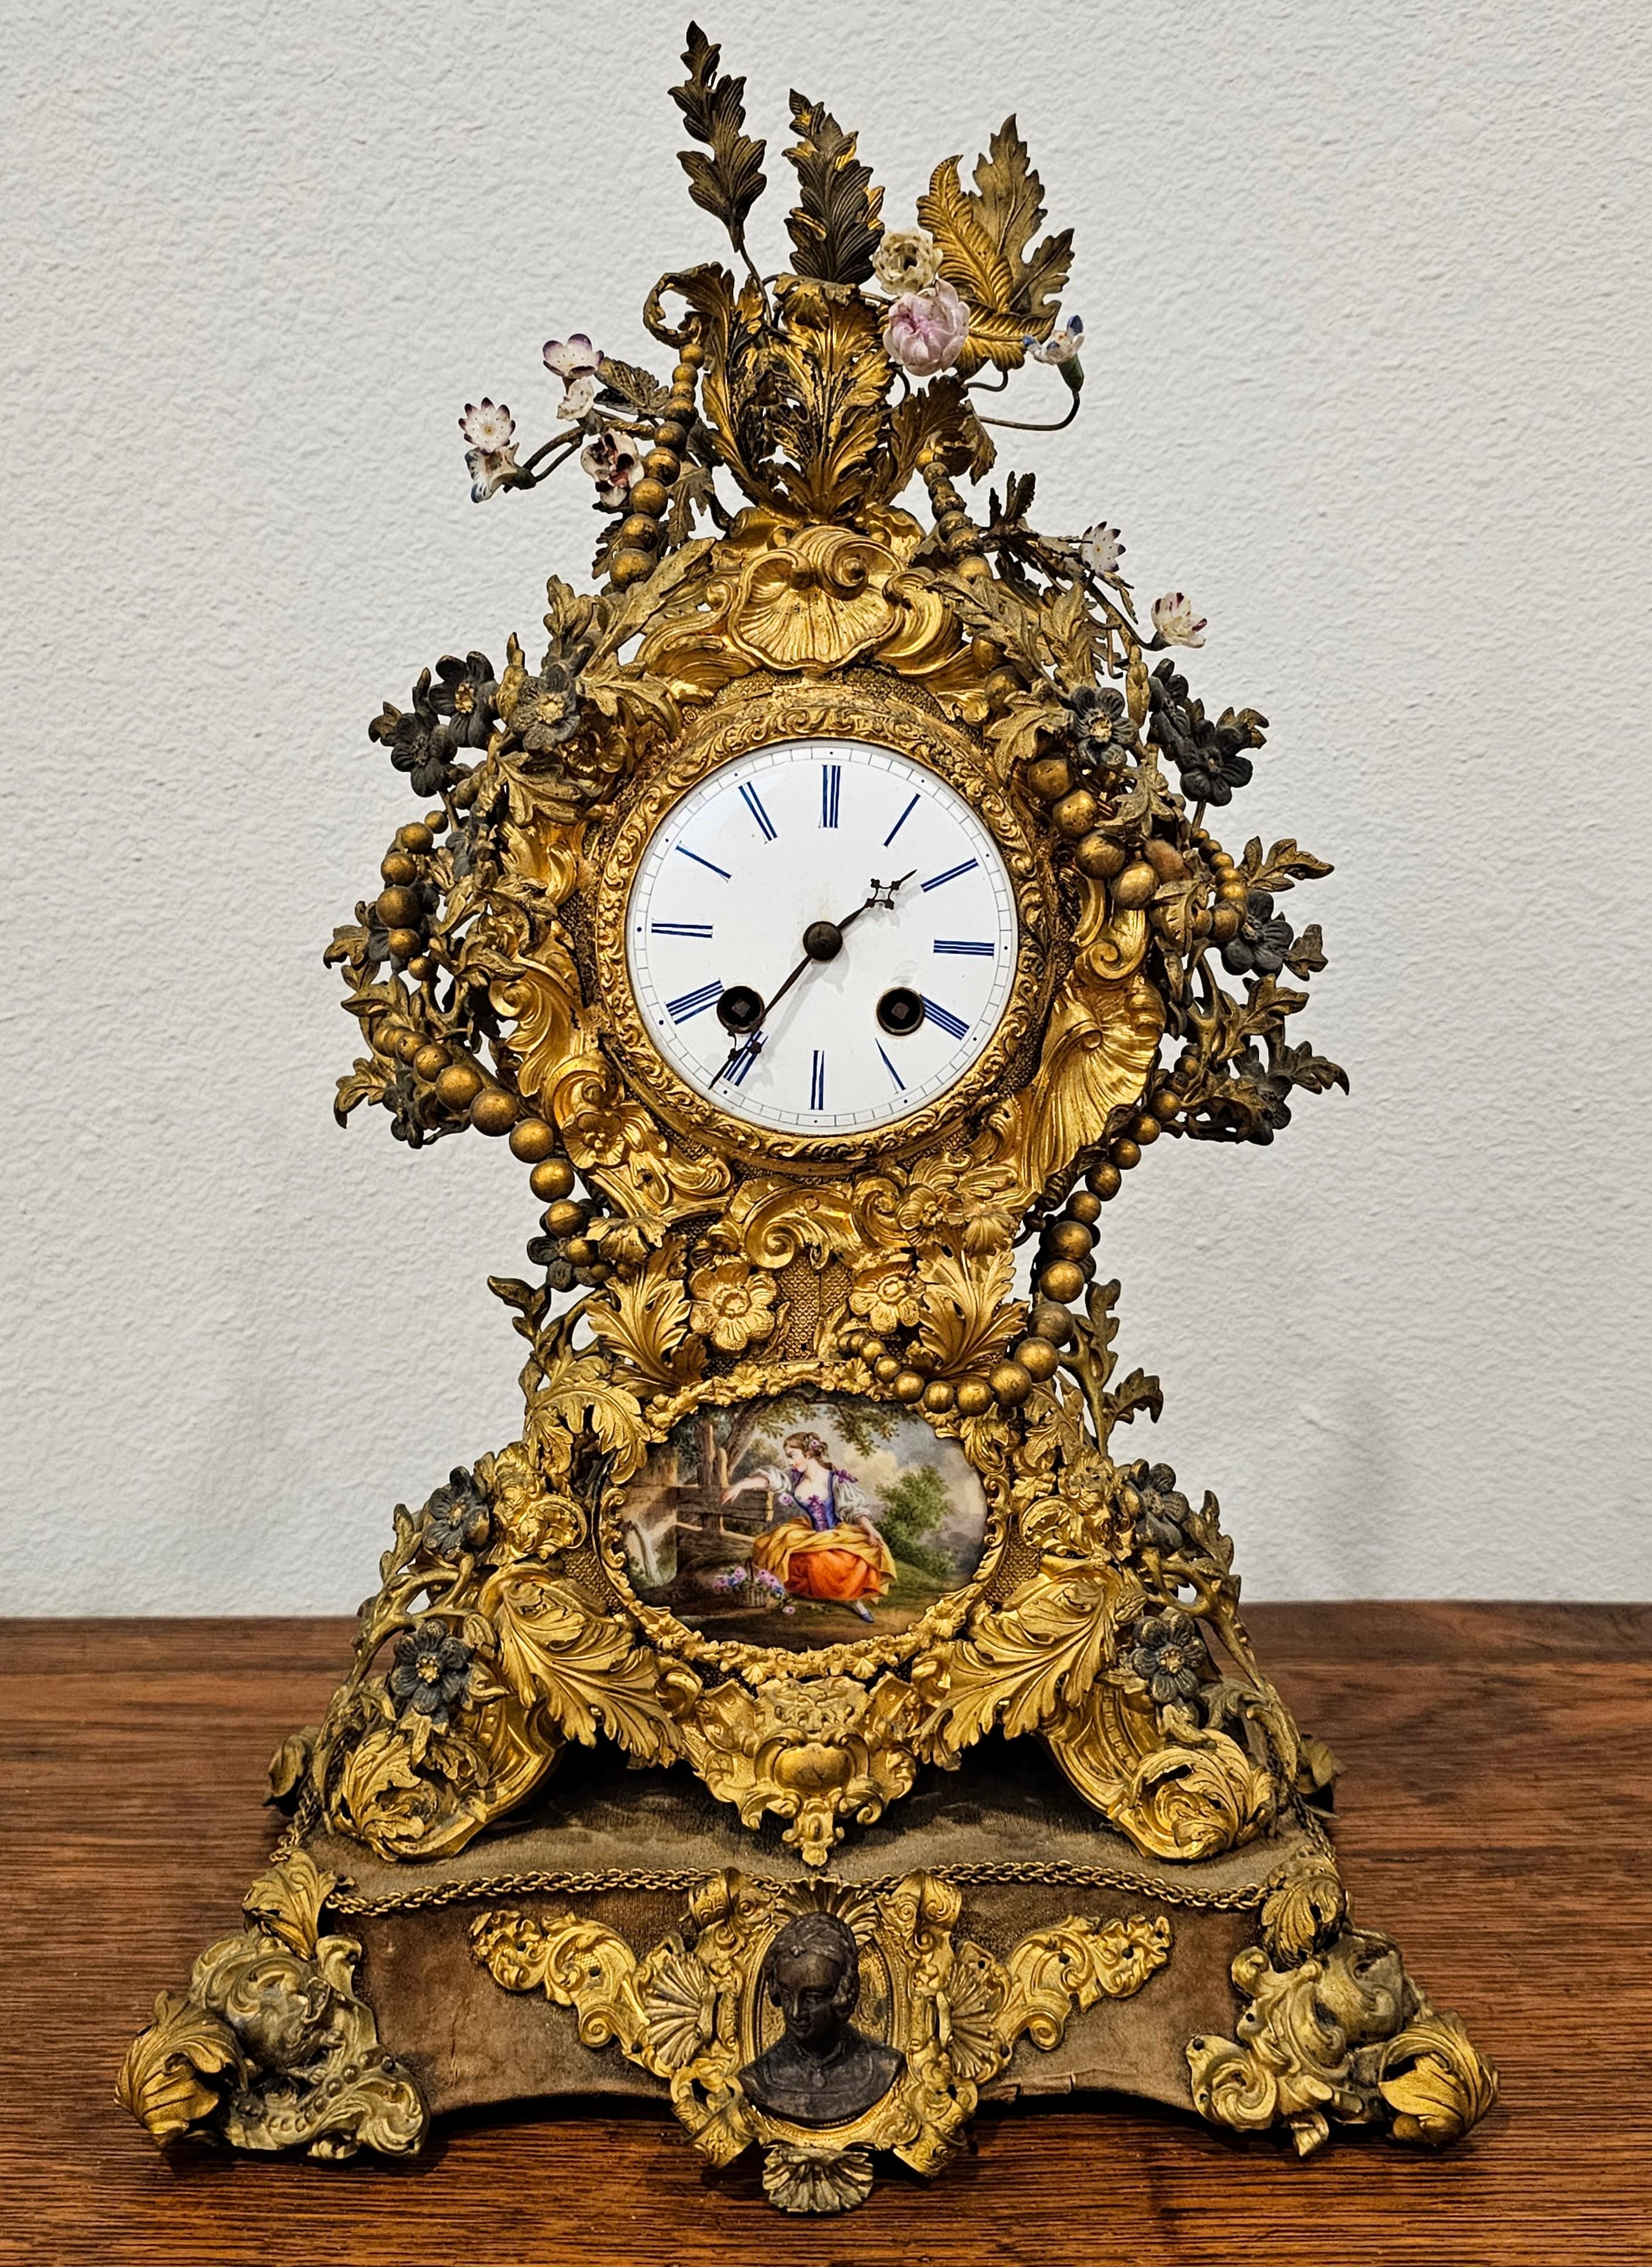 A breathtaking antique French Belle Époque period (1871-1914) porcelain mounted mixed metal mantel clock.

Born in France in the late 19th / early 20th century, fine quality Parisian work, exceptionally executed in luxuriously opulent 18th century